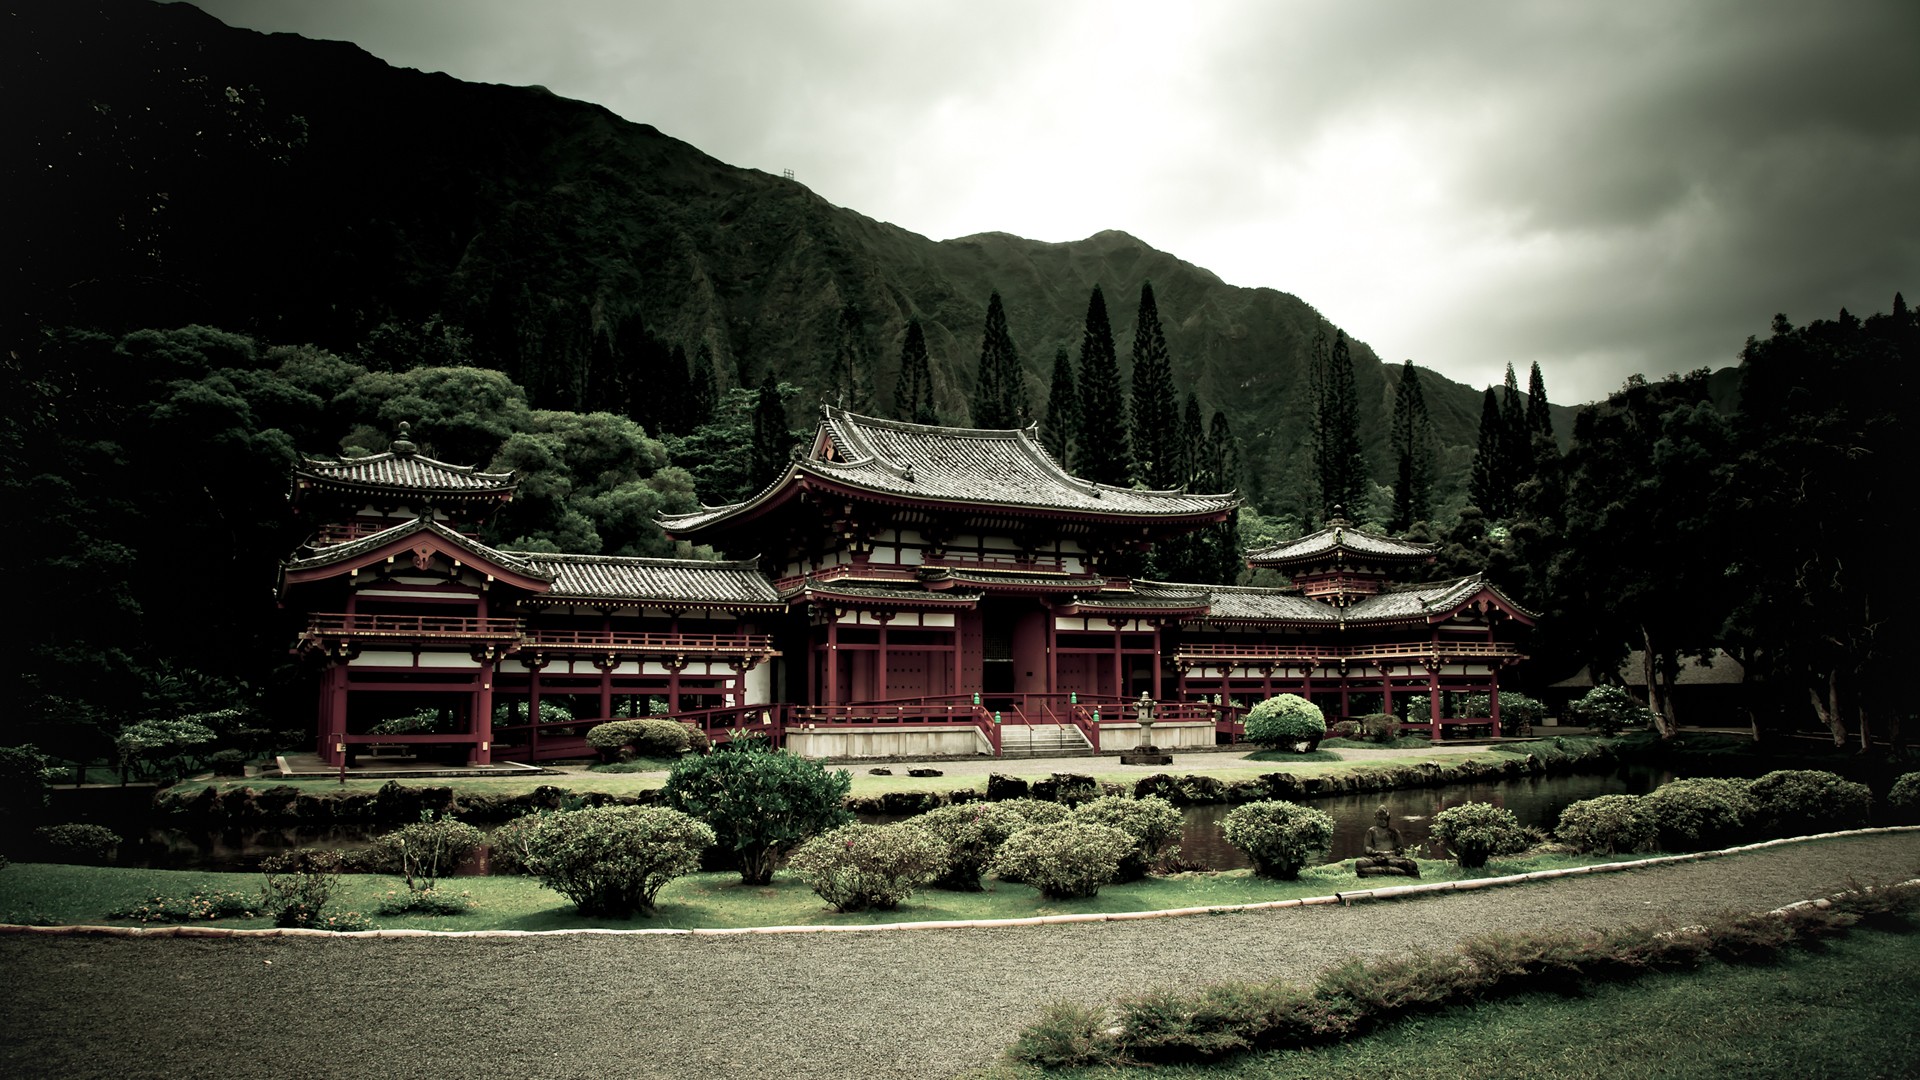 General 1920x1080 Asian architecture architecture temple landscape trees garden mountains path zen clouds filter The Byodo-In Temple monastery building plants Hawaii USA